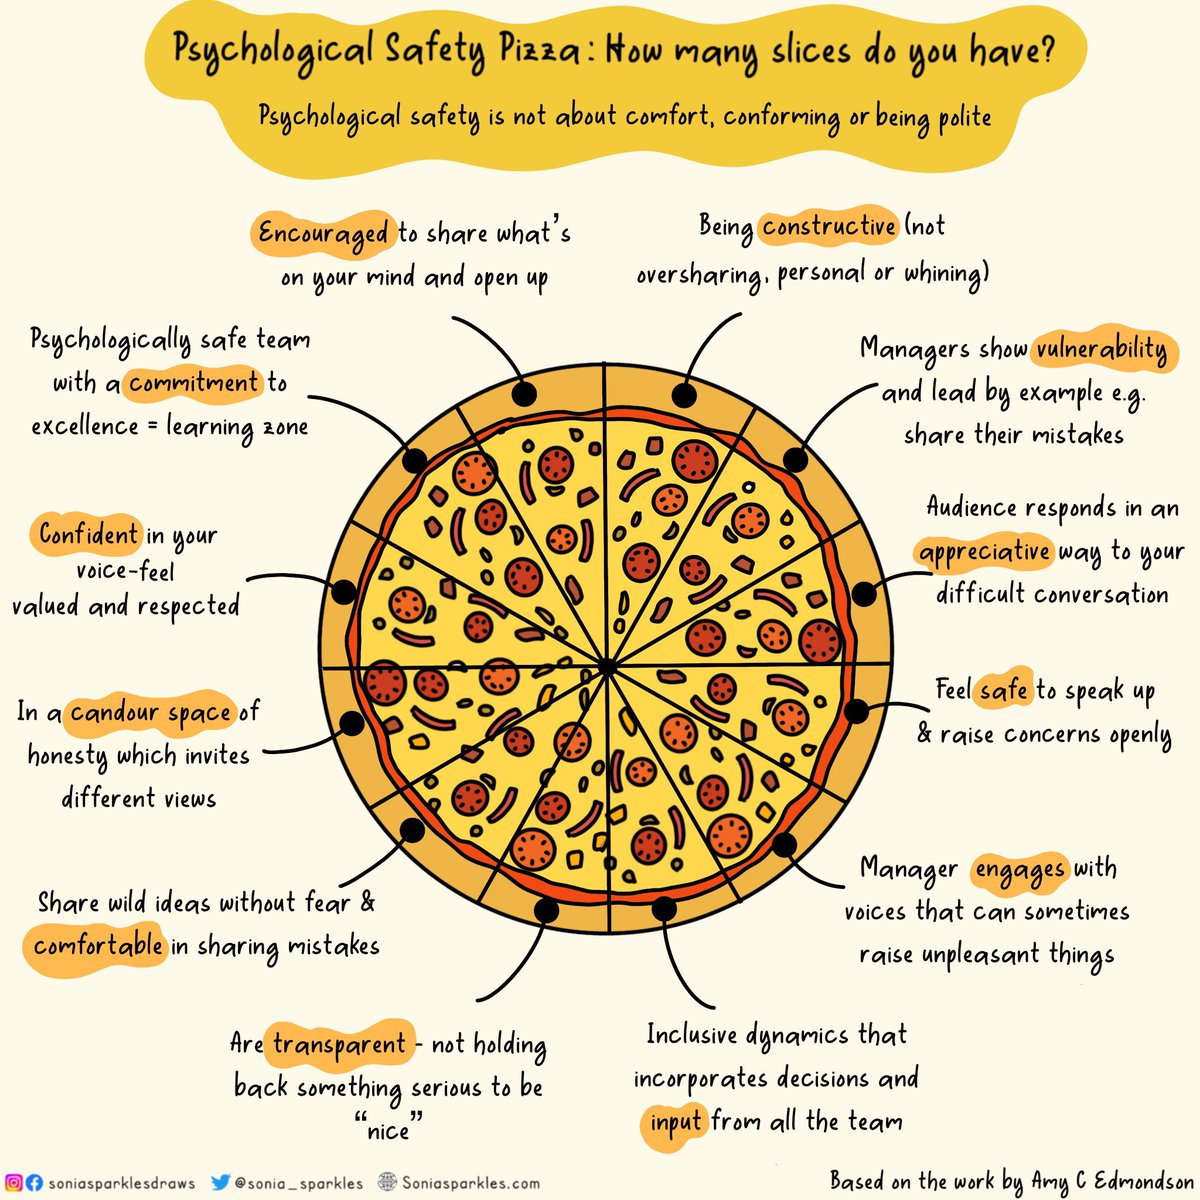 The pizza of psychological safety: How many slices do you have?